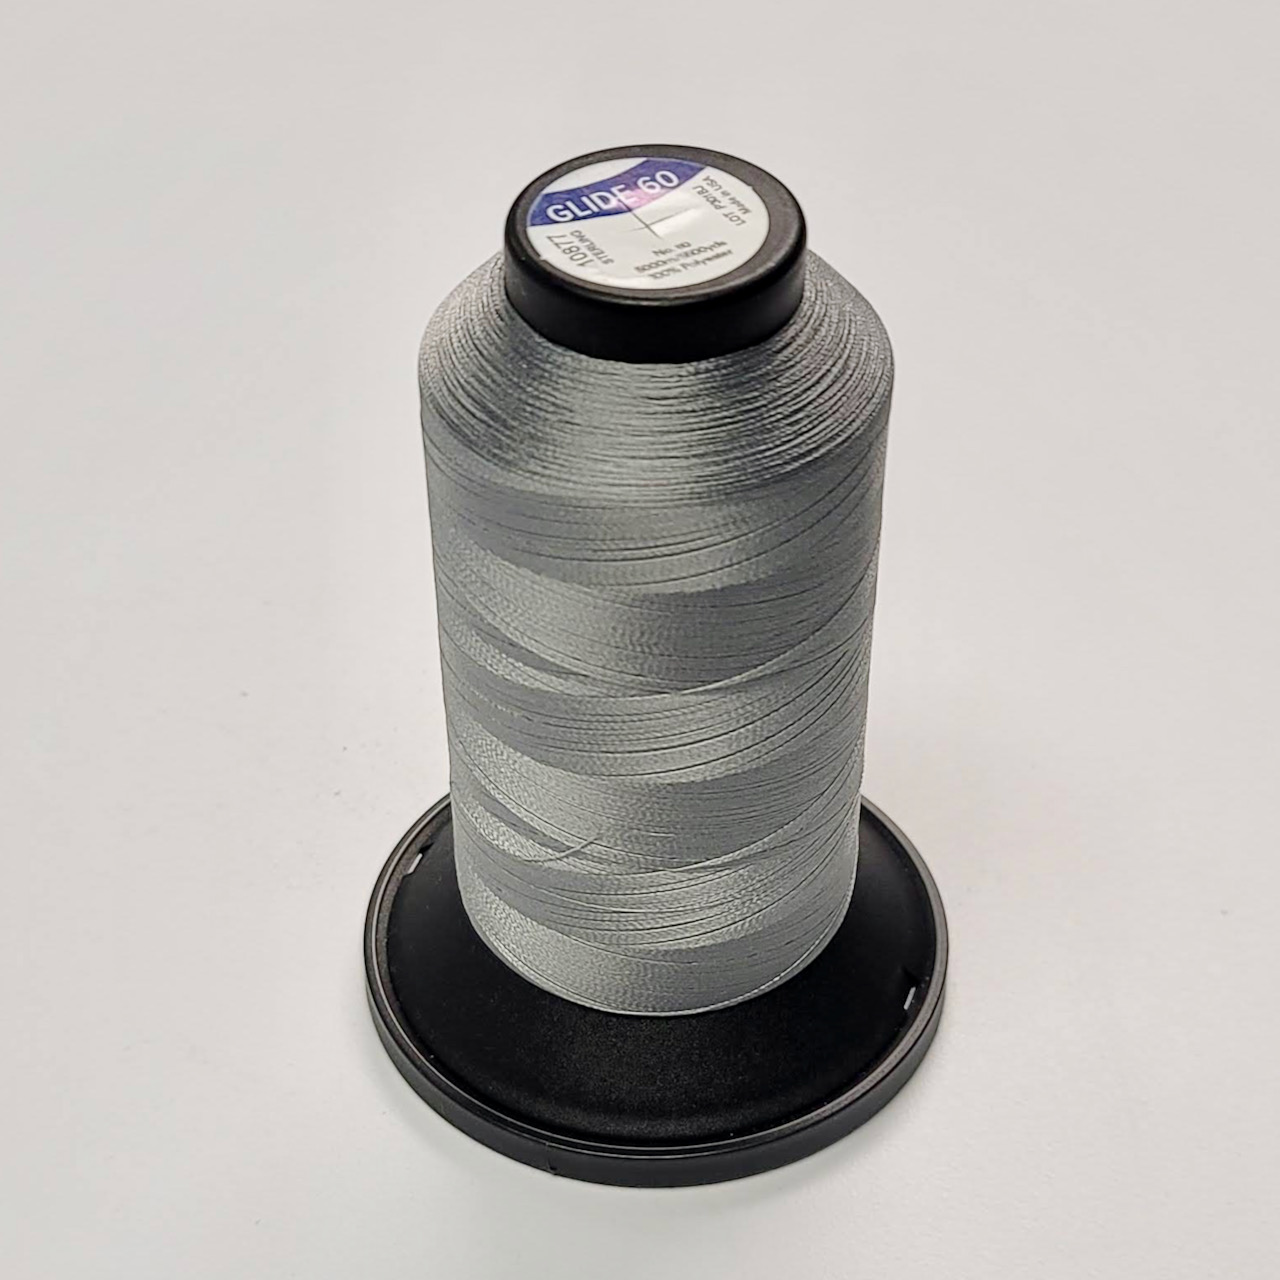 sterling gray 60wt. glide thread for machine quilting